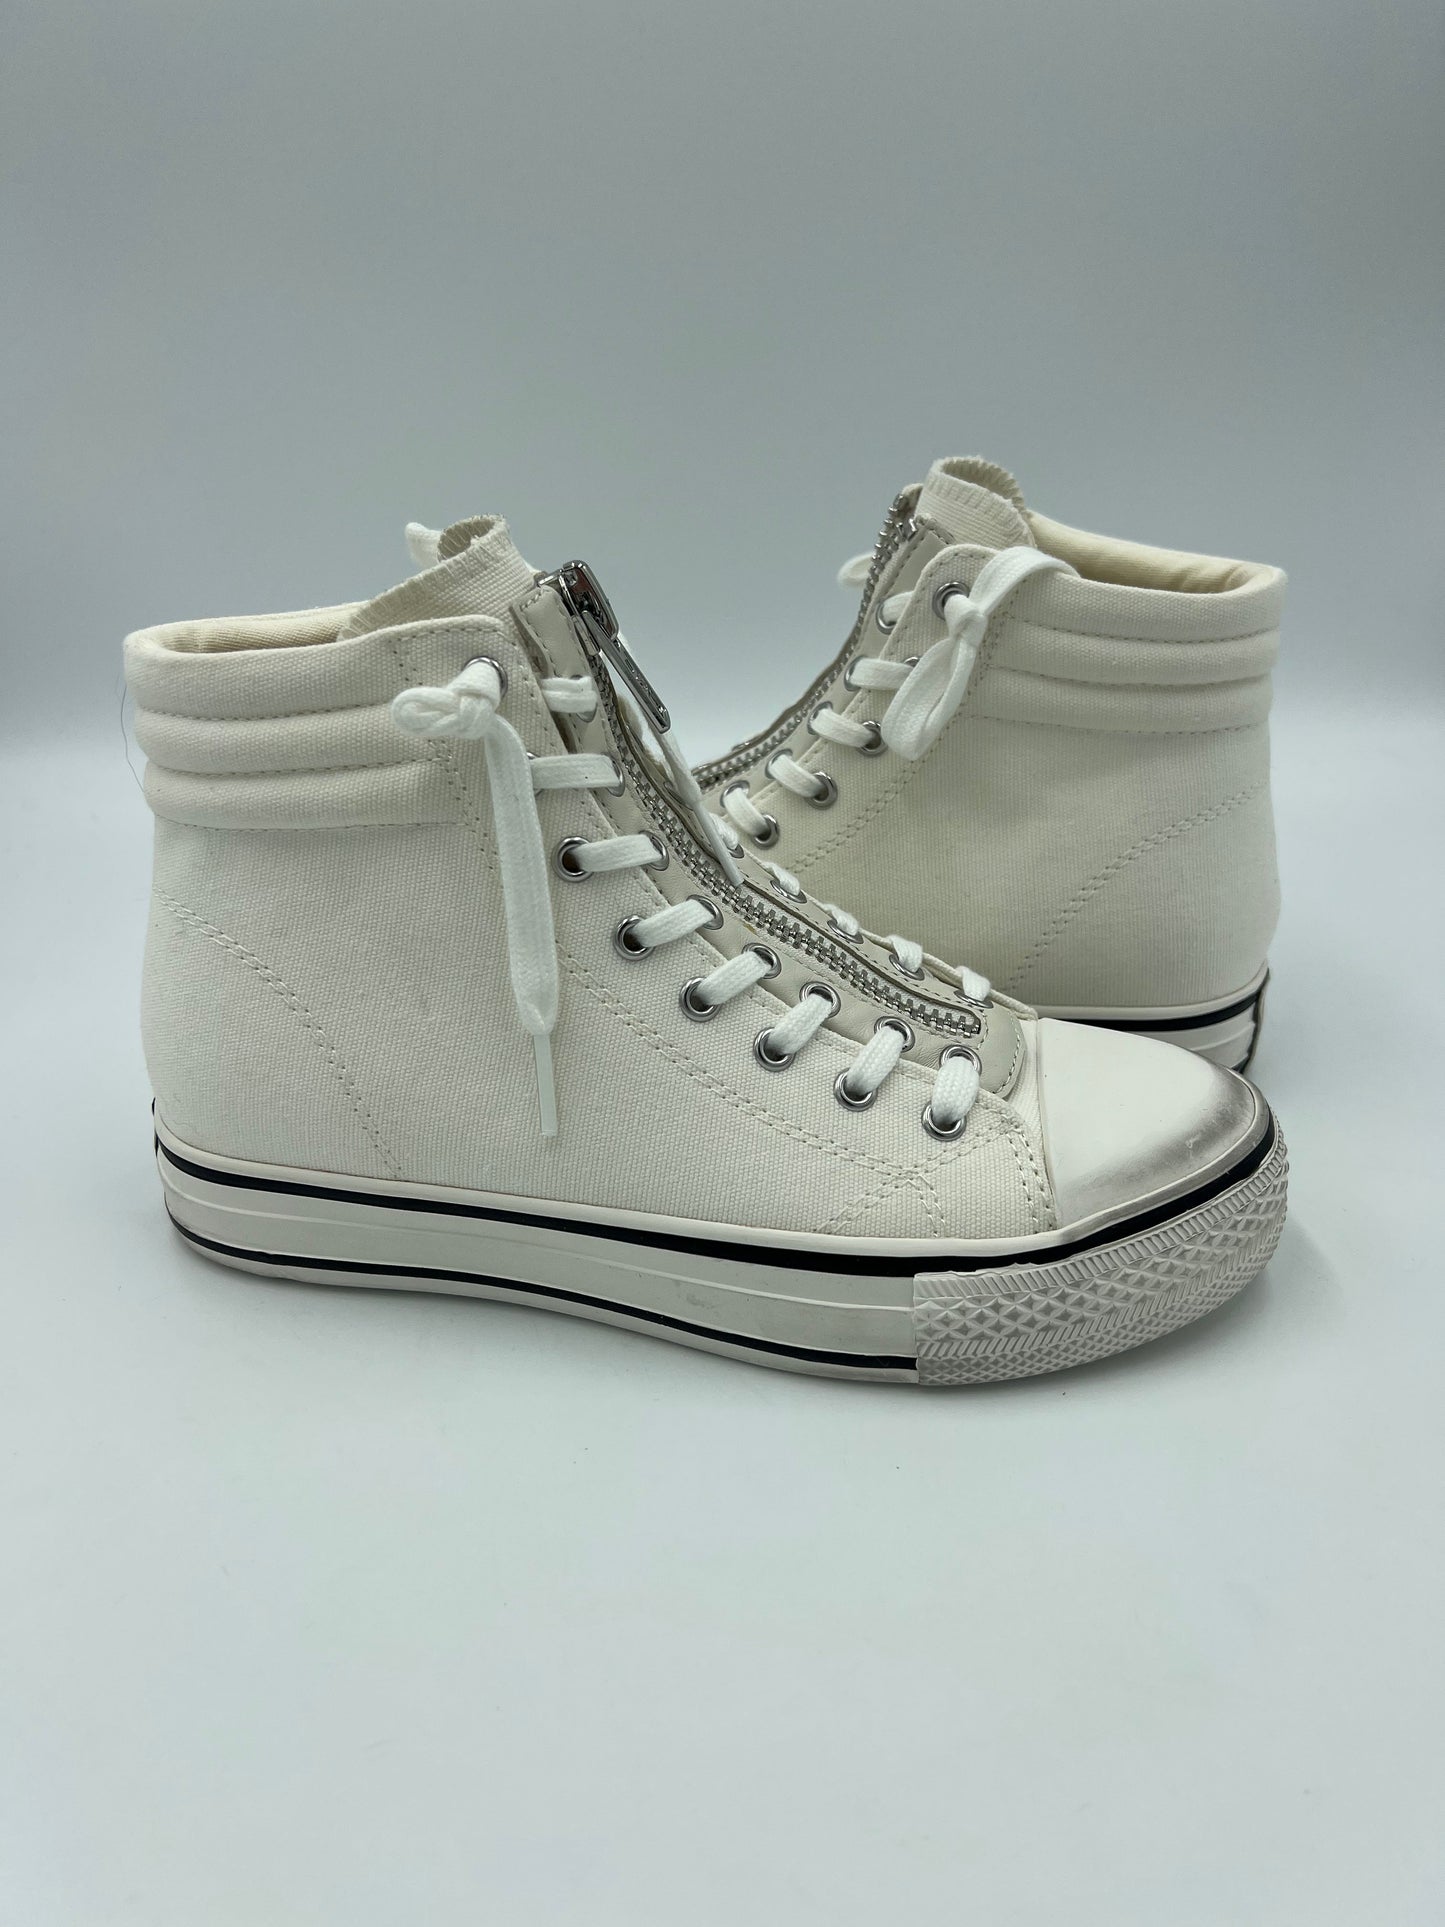 New! Shoes Sneakers By Ash  Size: 5.5